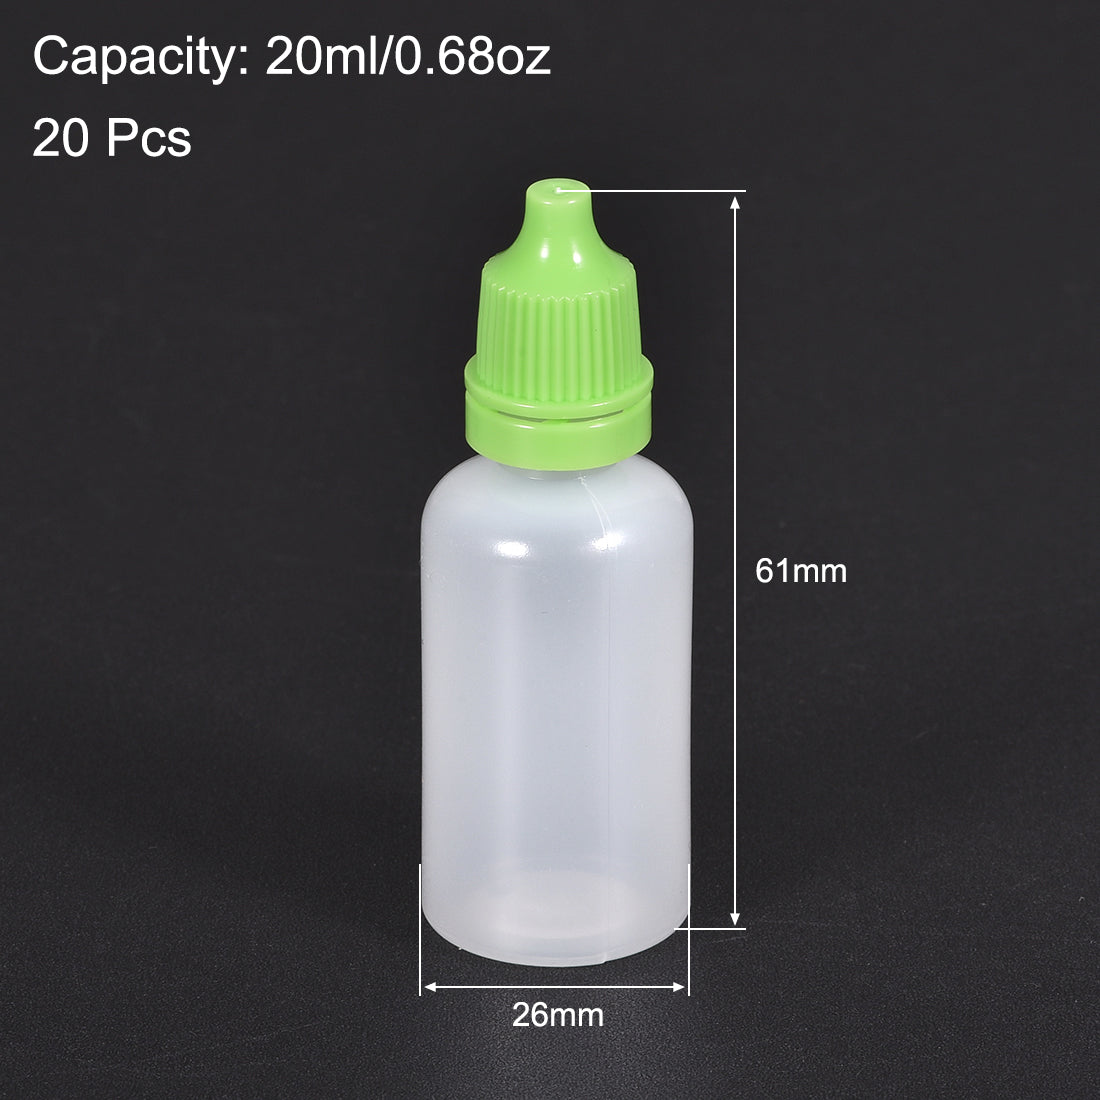 uxcell Uxcell 20ml/0.68 oz Empty Squeezable Dropper Bottle Green 20pcs